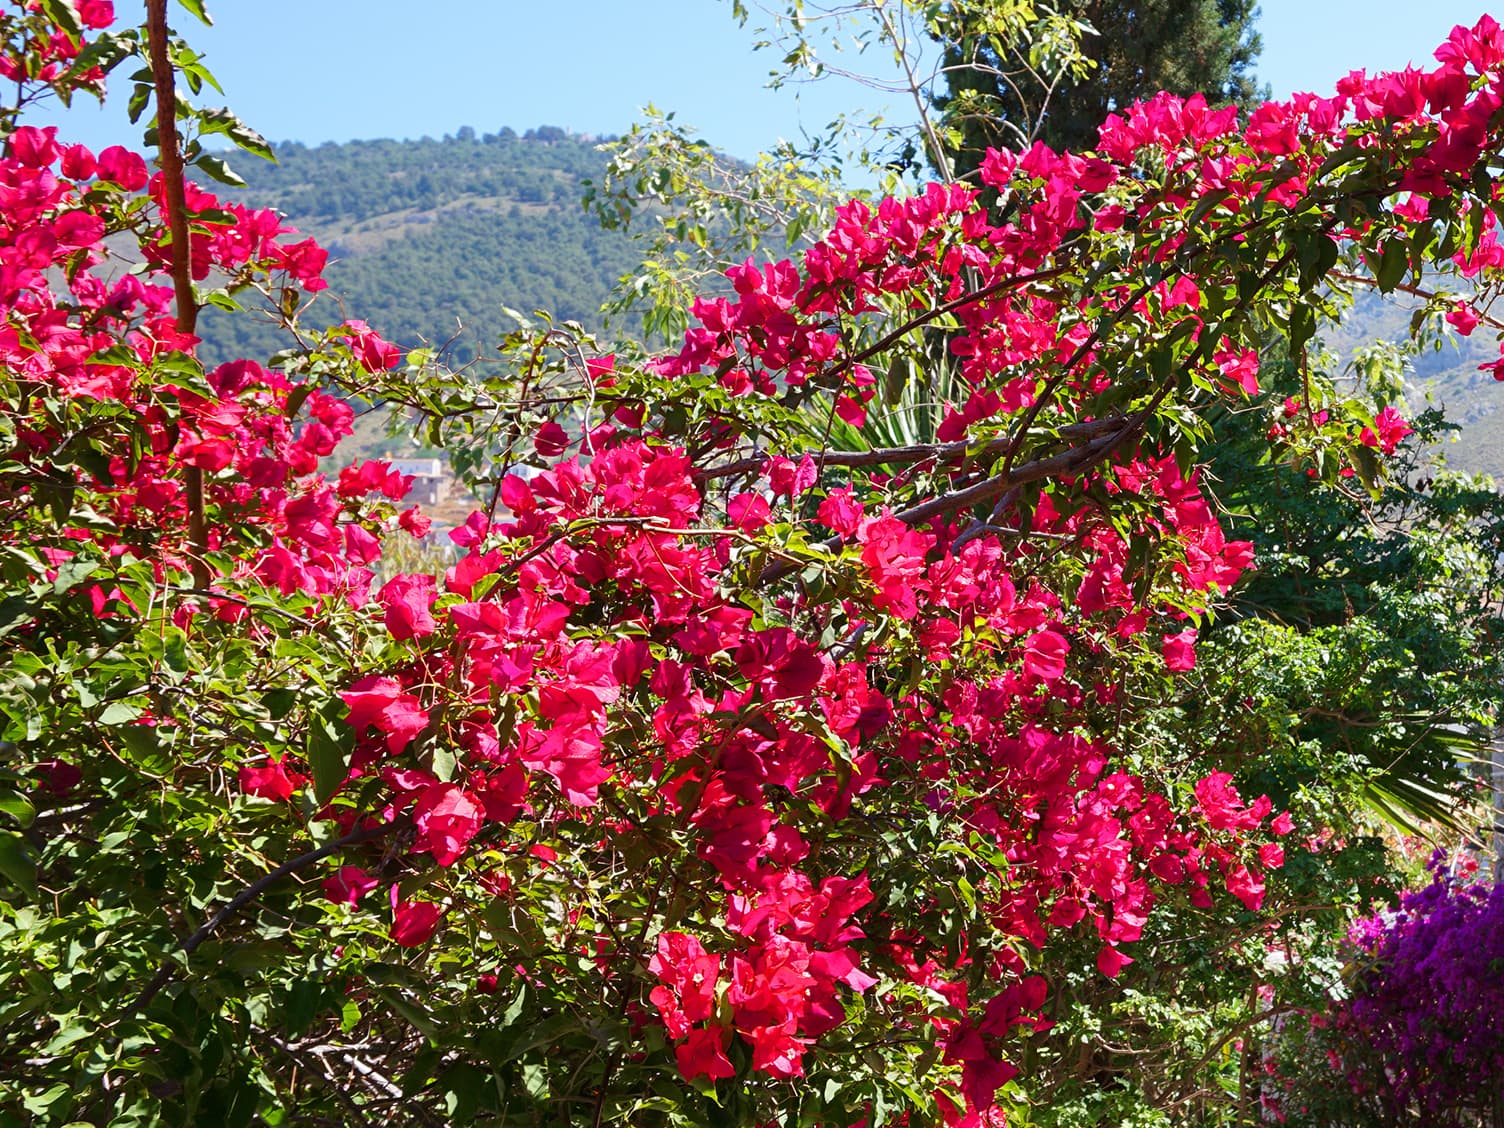 Bright pink flowers on a vine